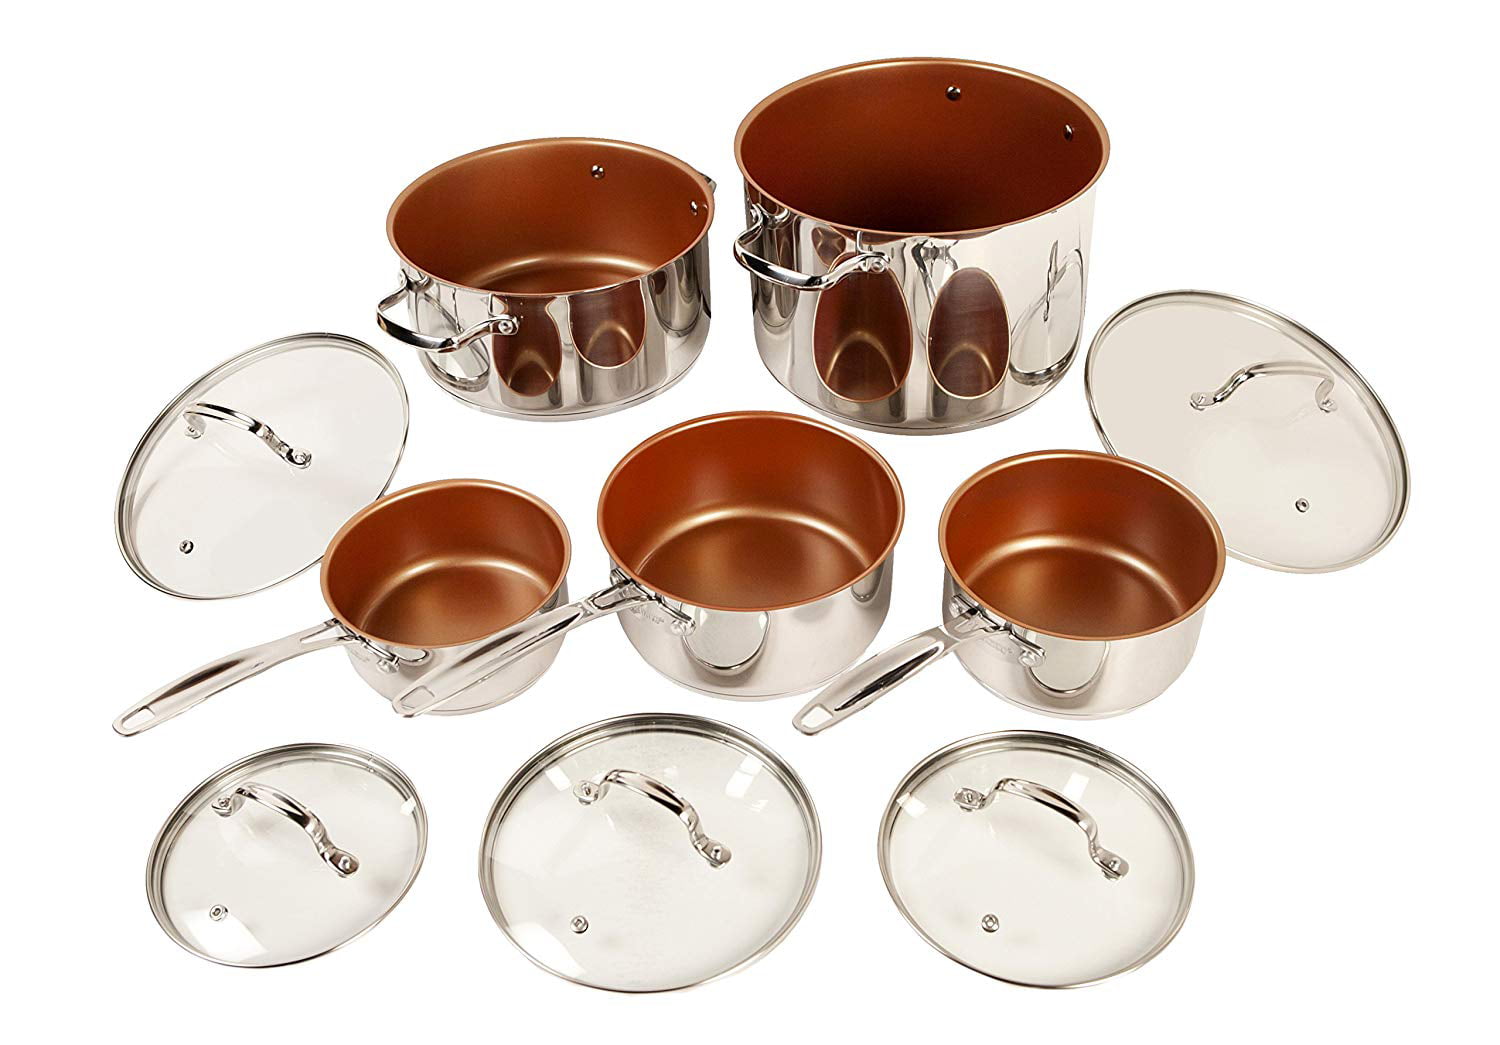 Best Buy: NuWave 10-Piece Forged Cookware Set Copper 31422